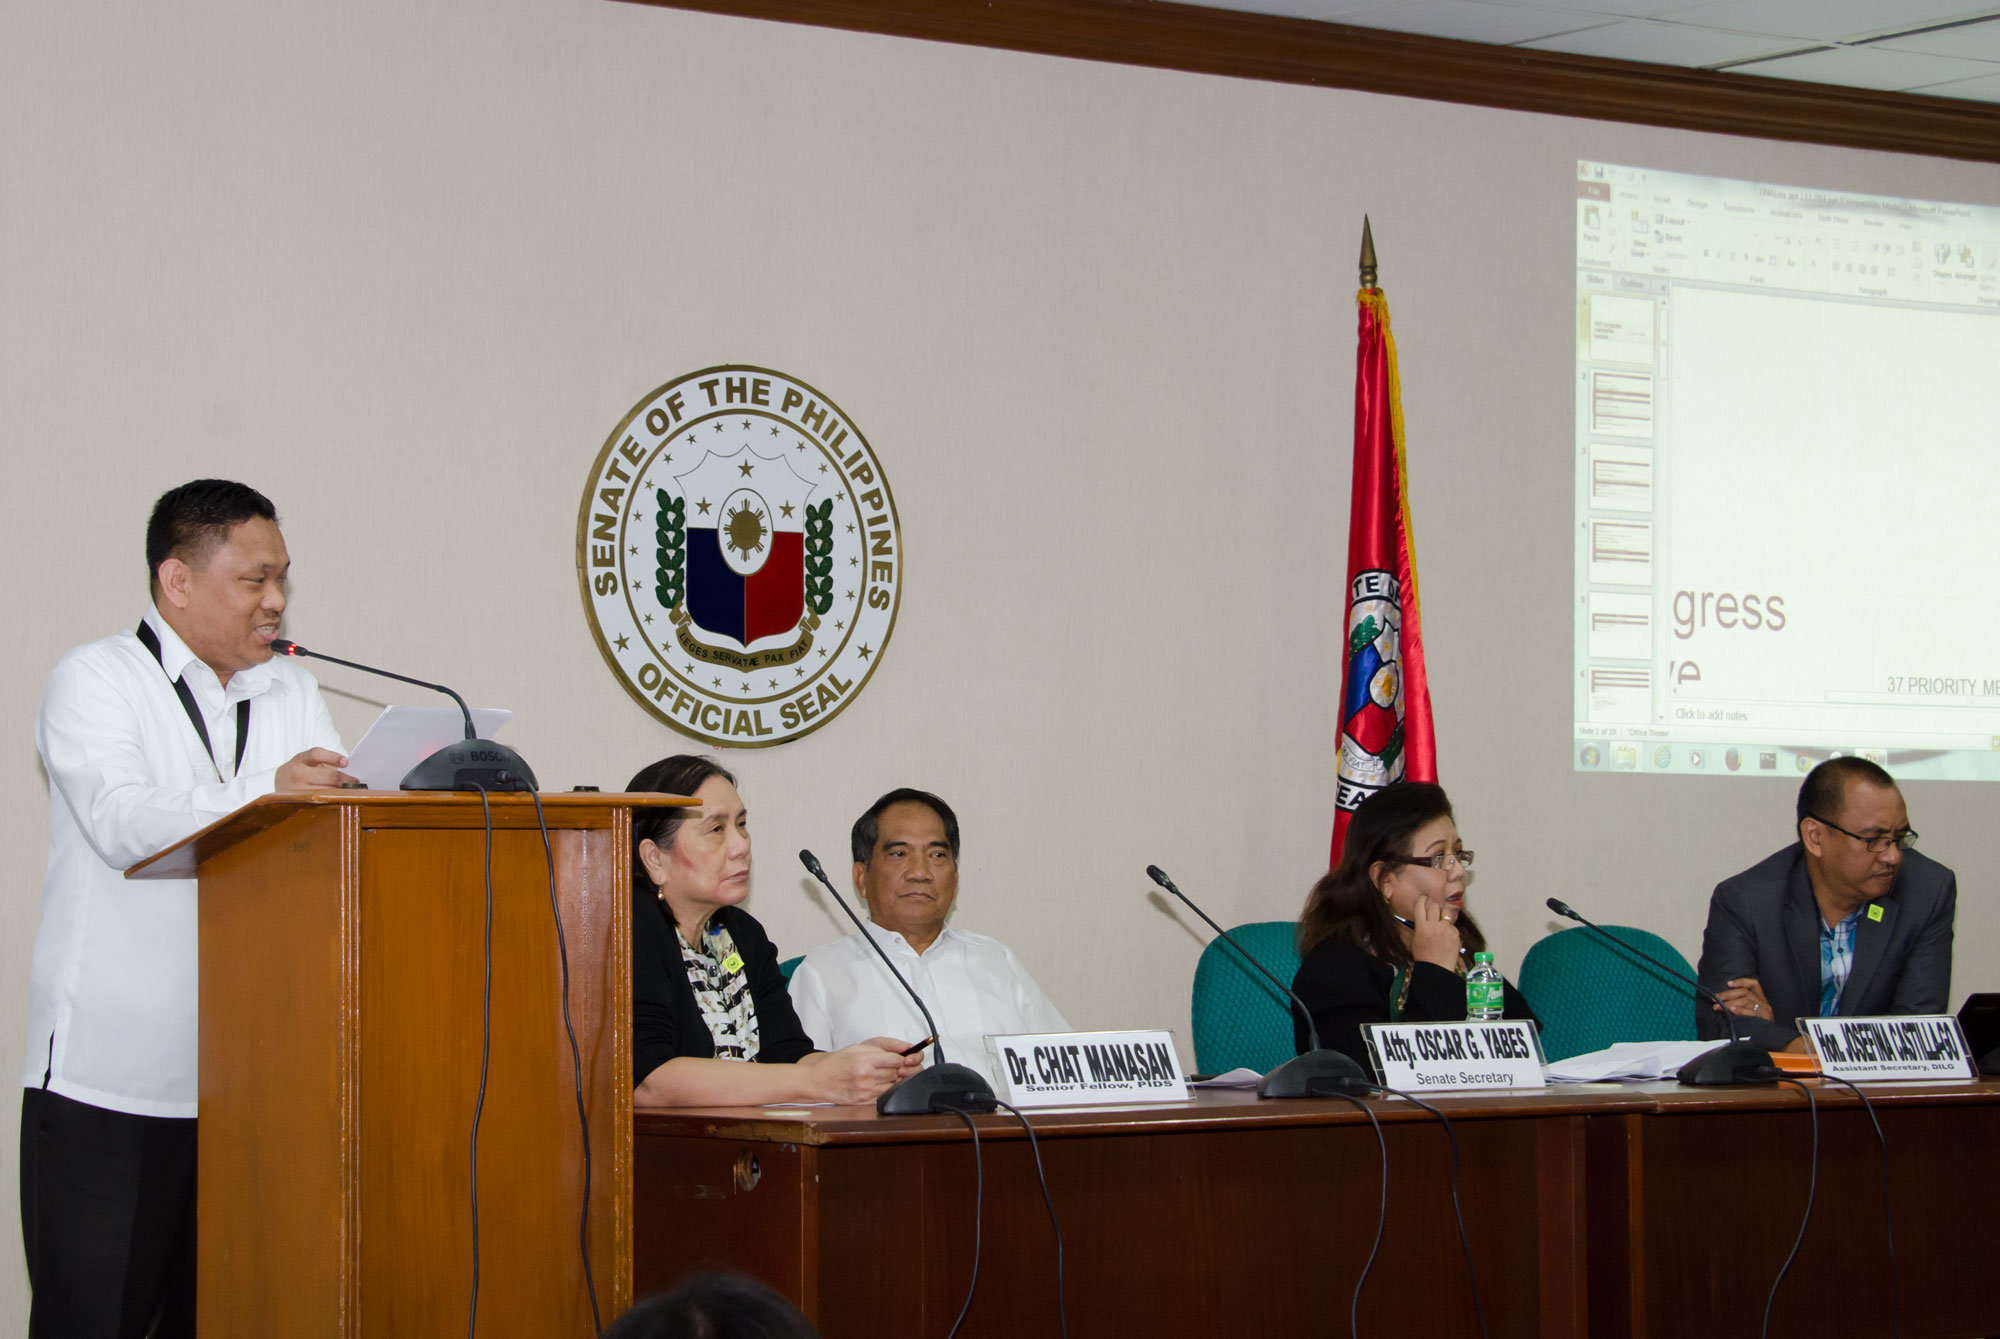 Senate Centennial Lecture Series Assessment Of The Bottom-Up Budgeting Process For FY 2015-GGM_7850.jpg